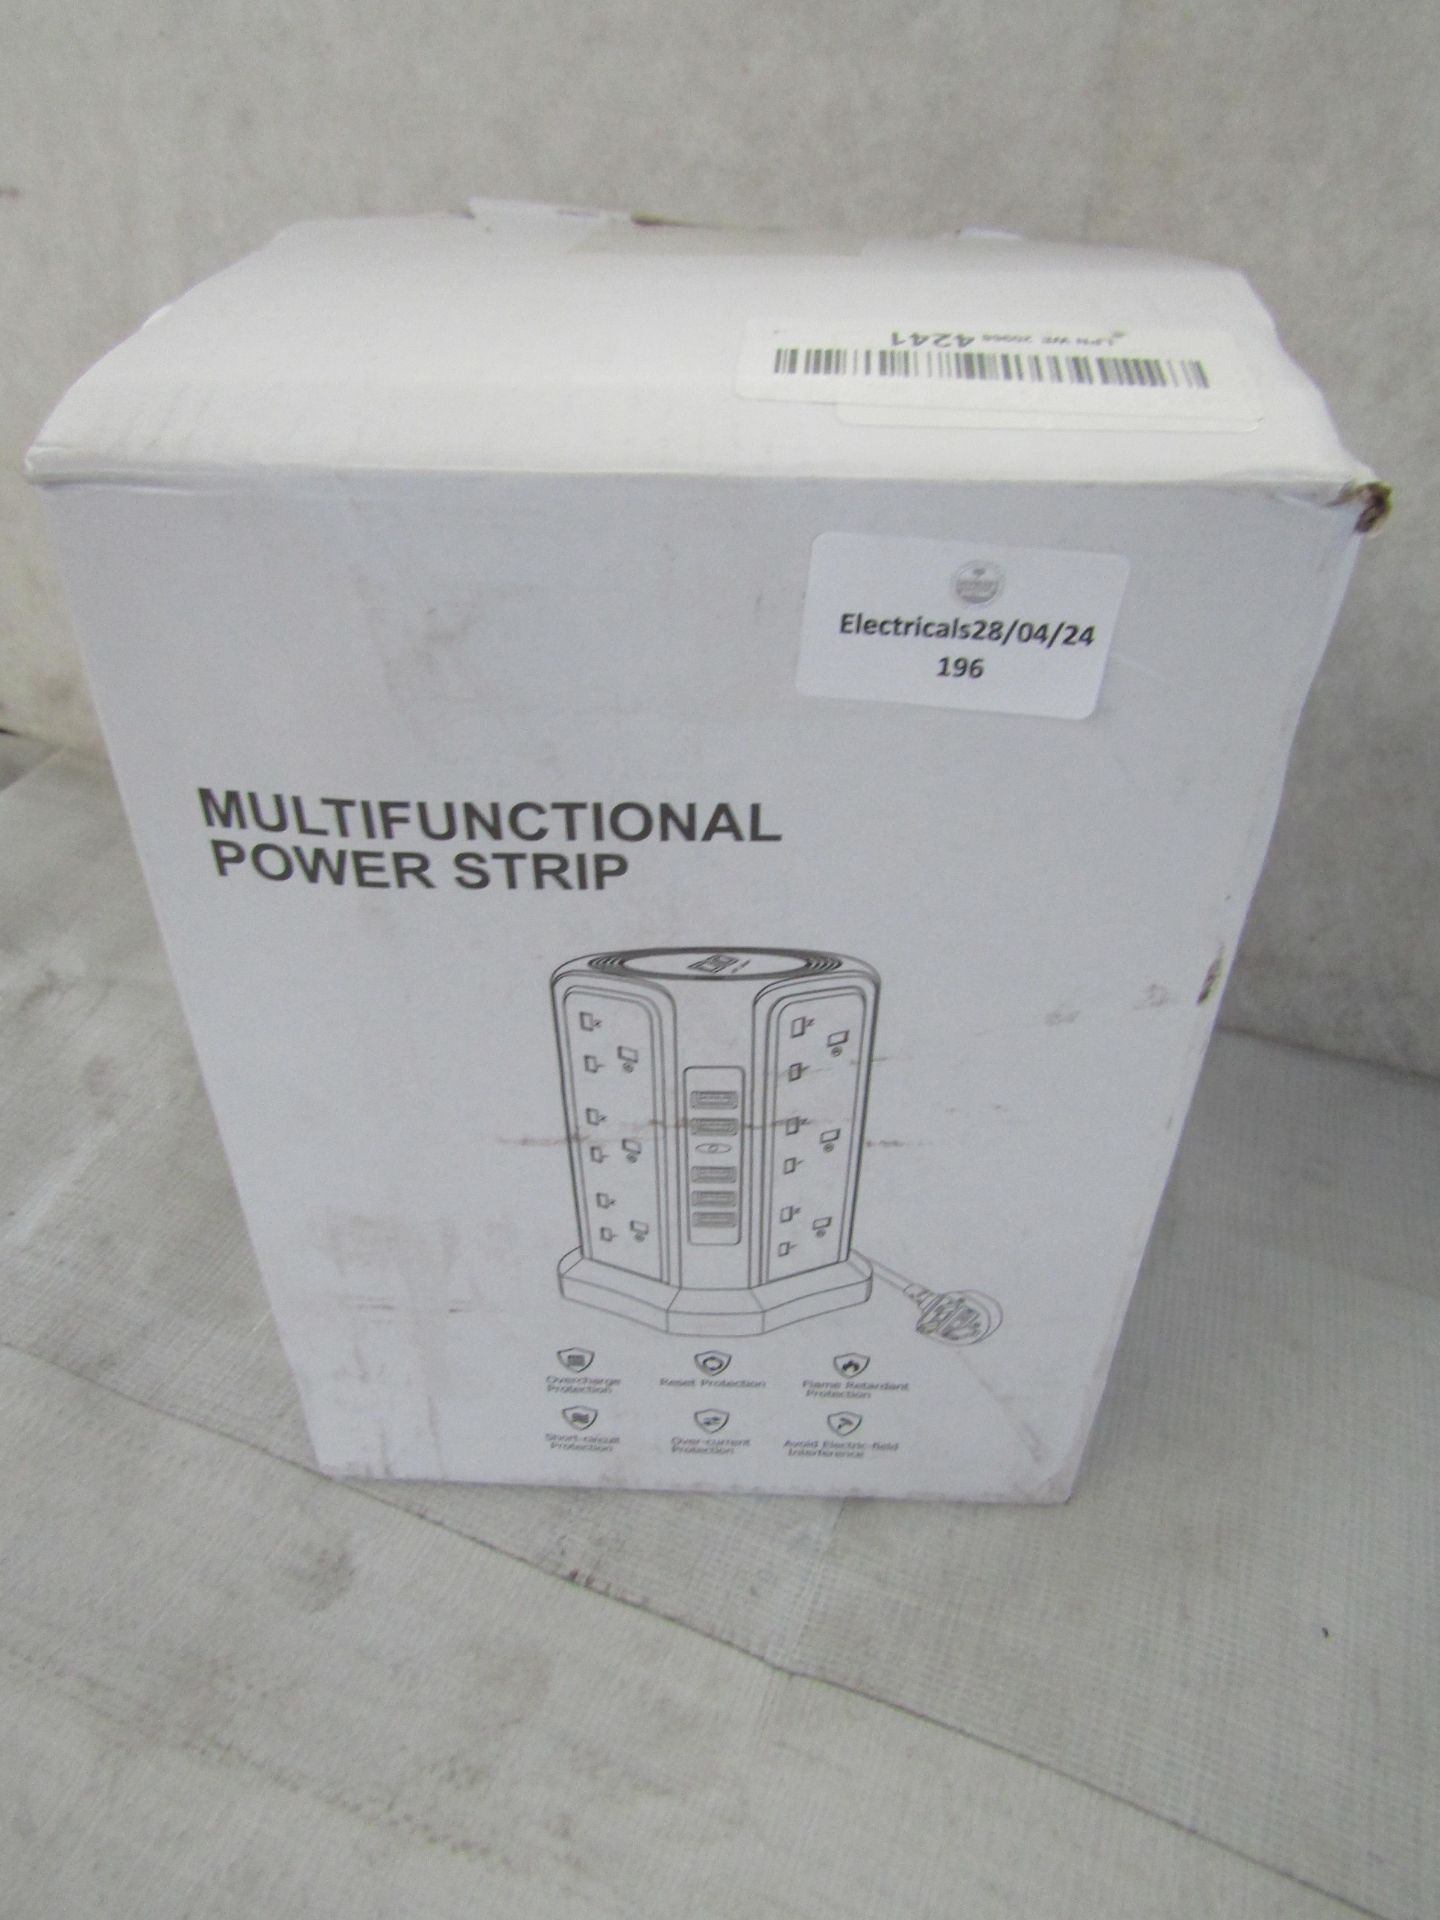 Multifunctional Power Strip, Unchecked & Boxed.